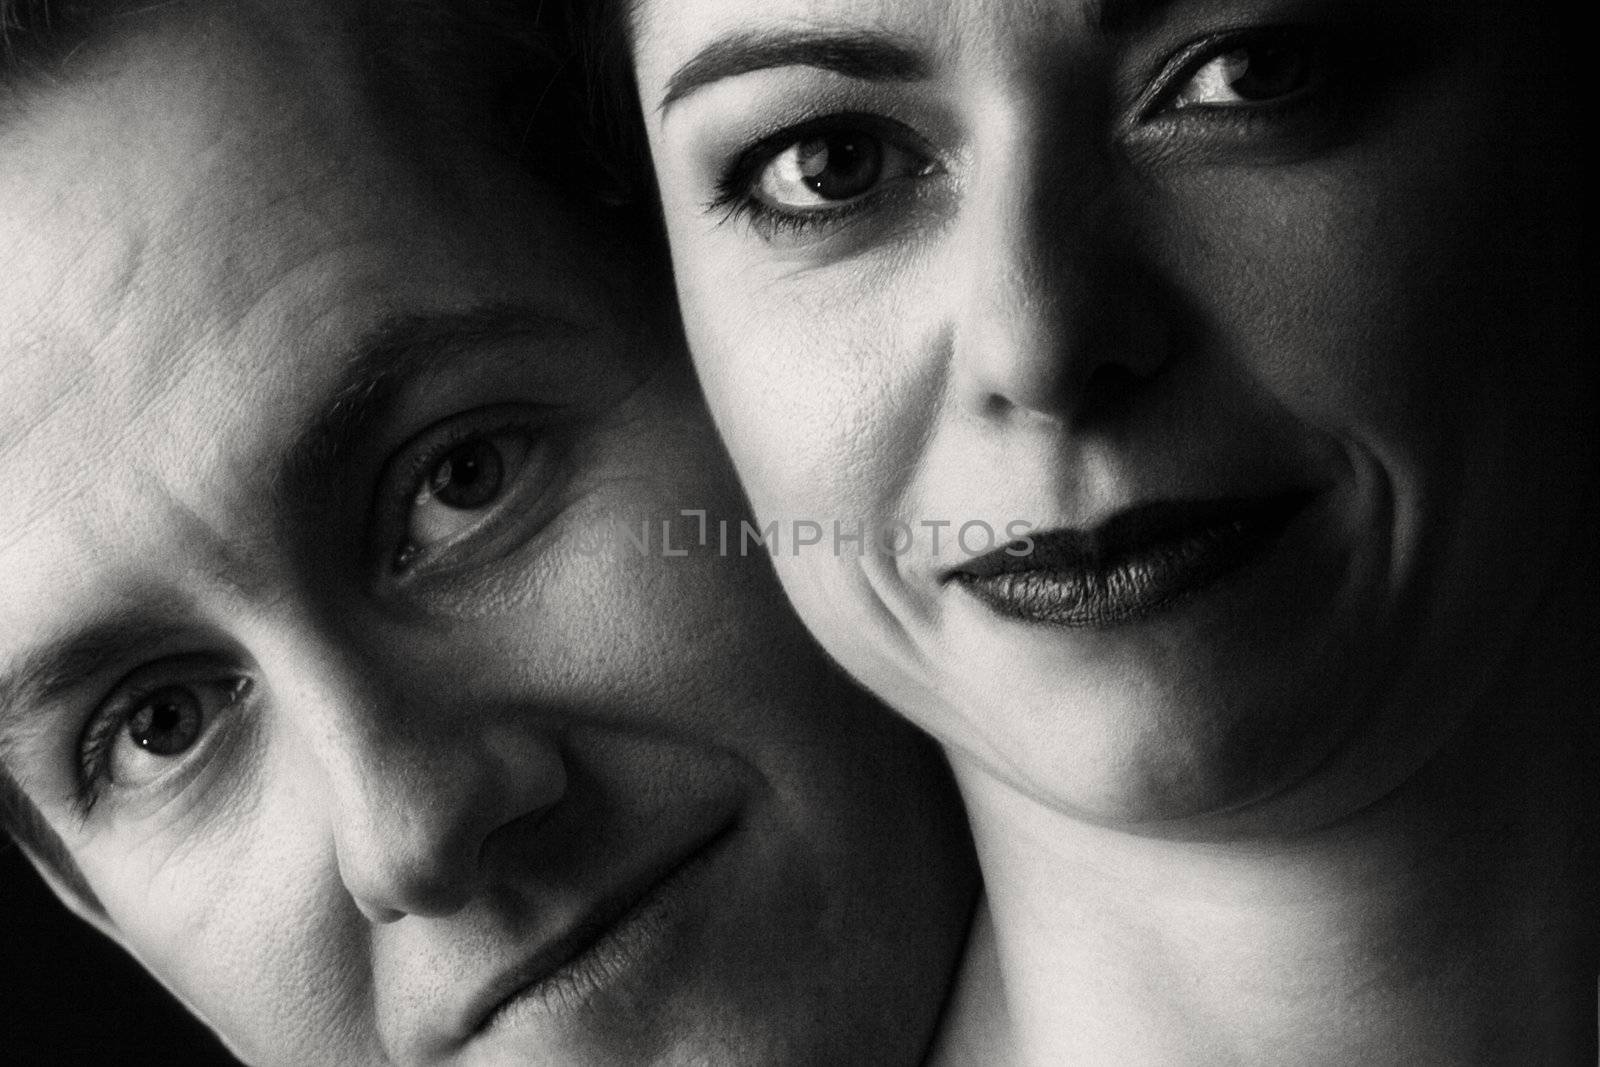 Married lovers portraits taken in the photo studio close up in black and white